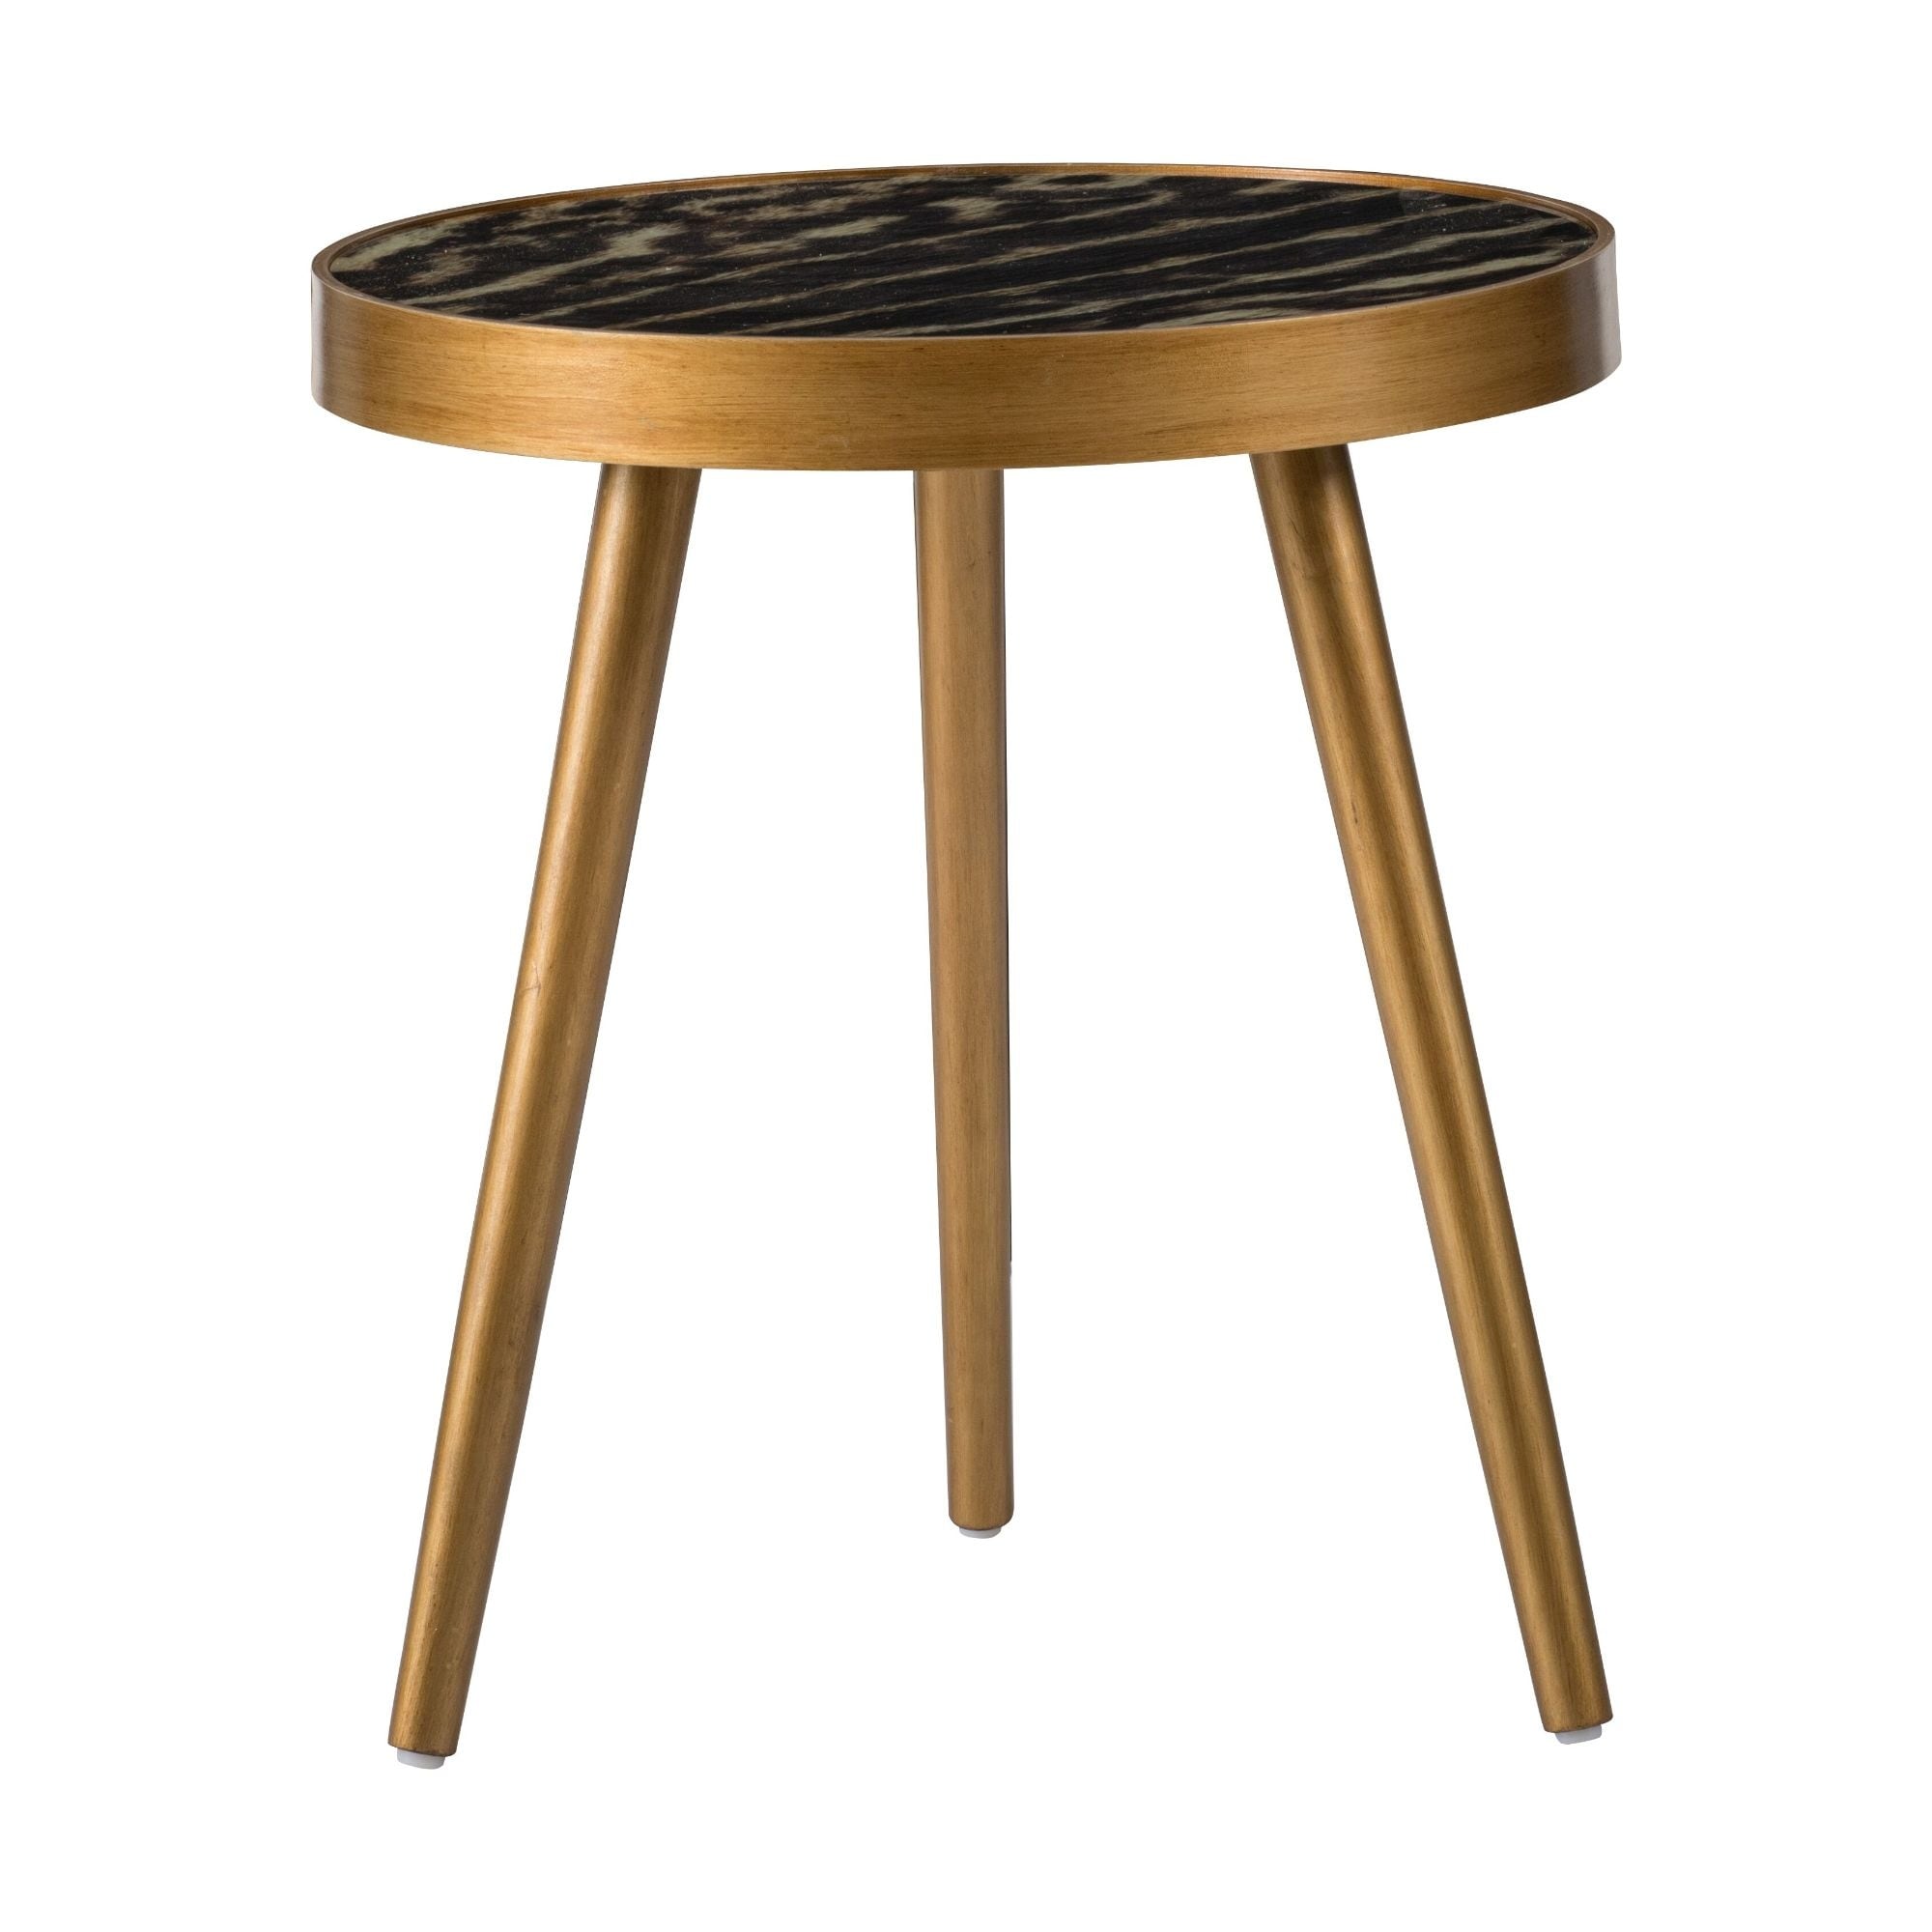 Featured image of post Black And Gold Round Coffee Table : Then, think about the color of the base.